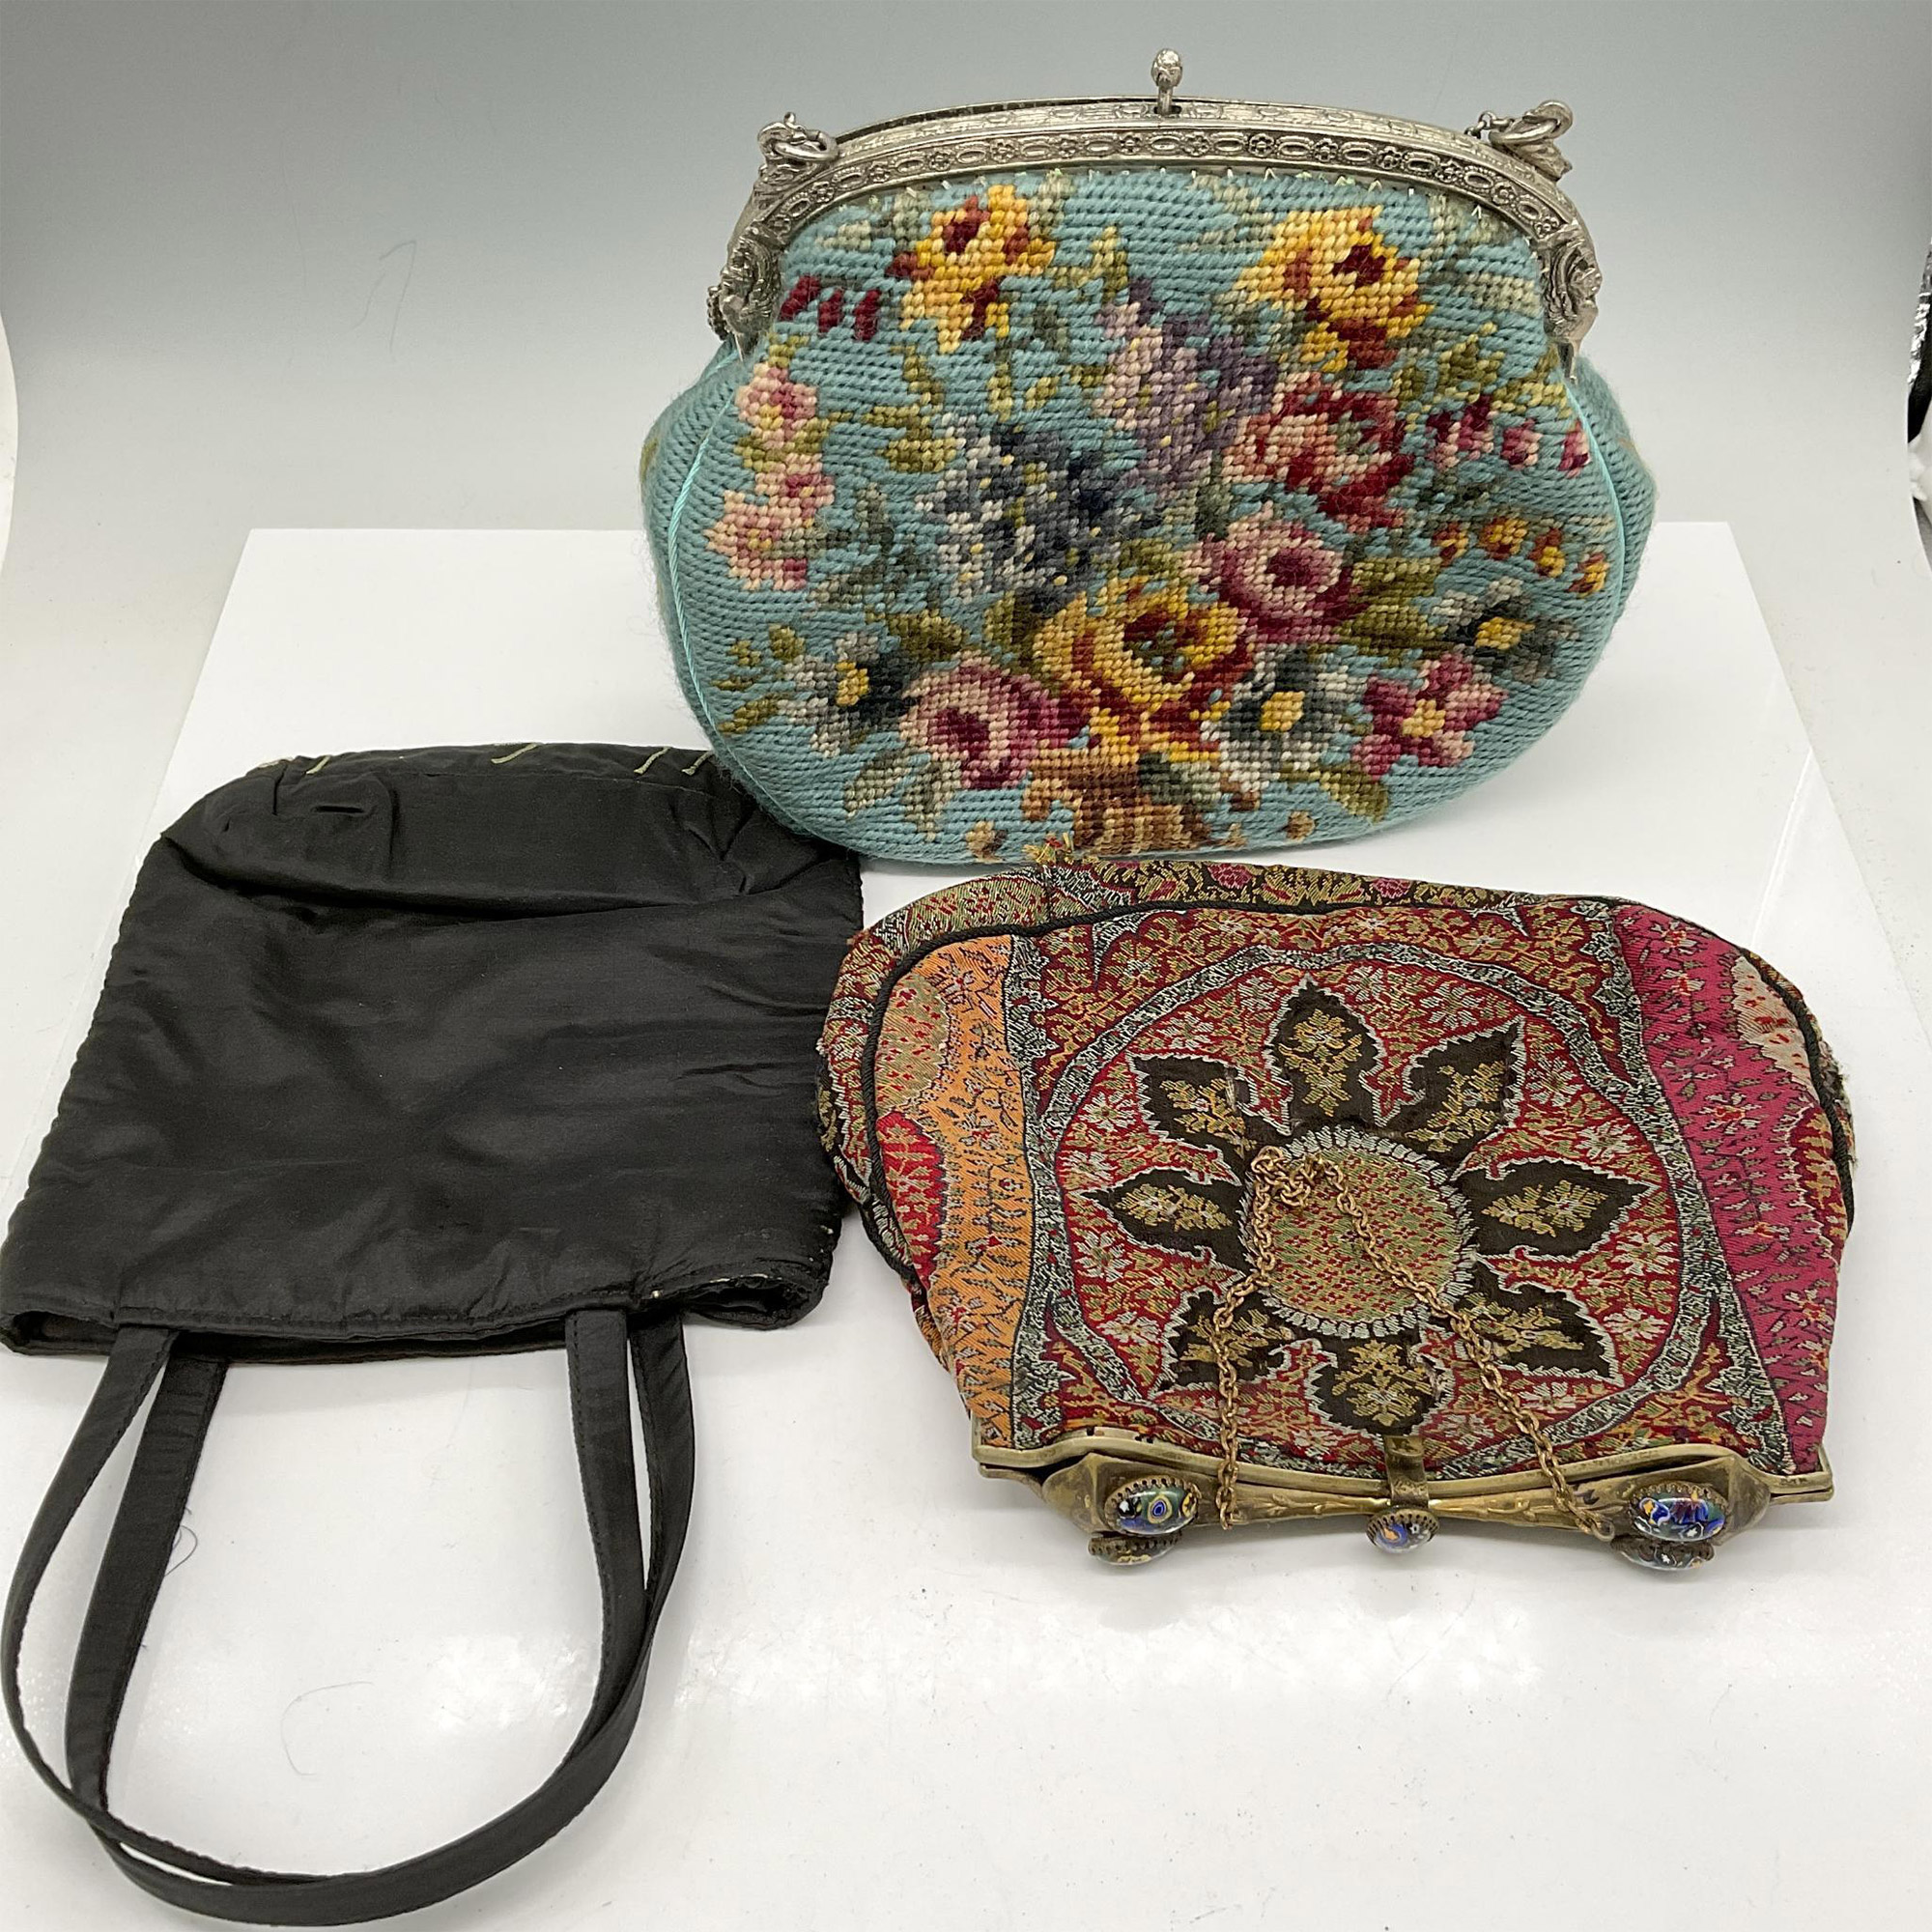 3pc Fabric and Embroidered Purses - Image 2 of 3